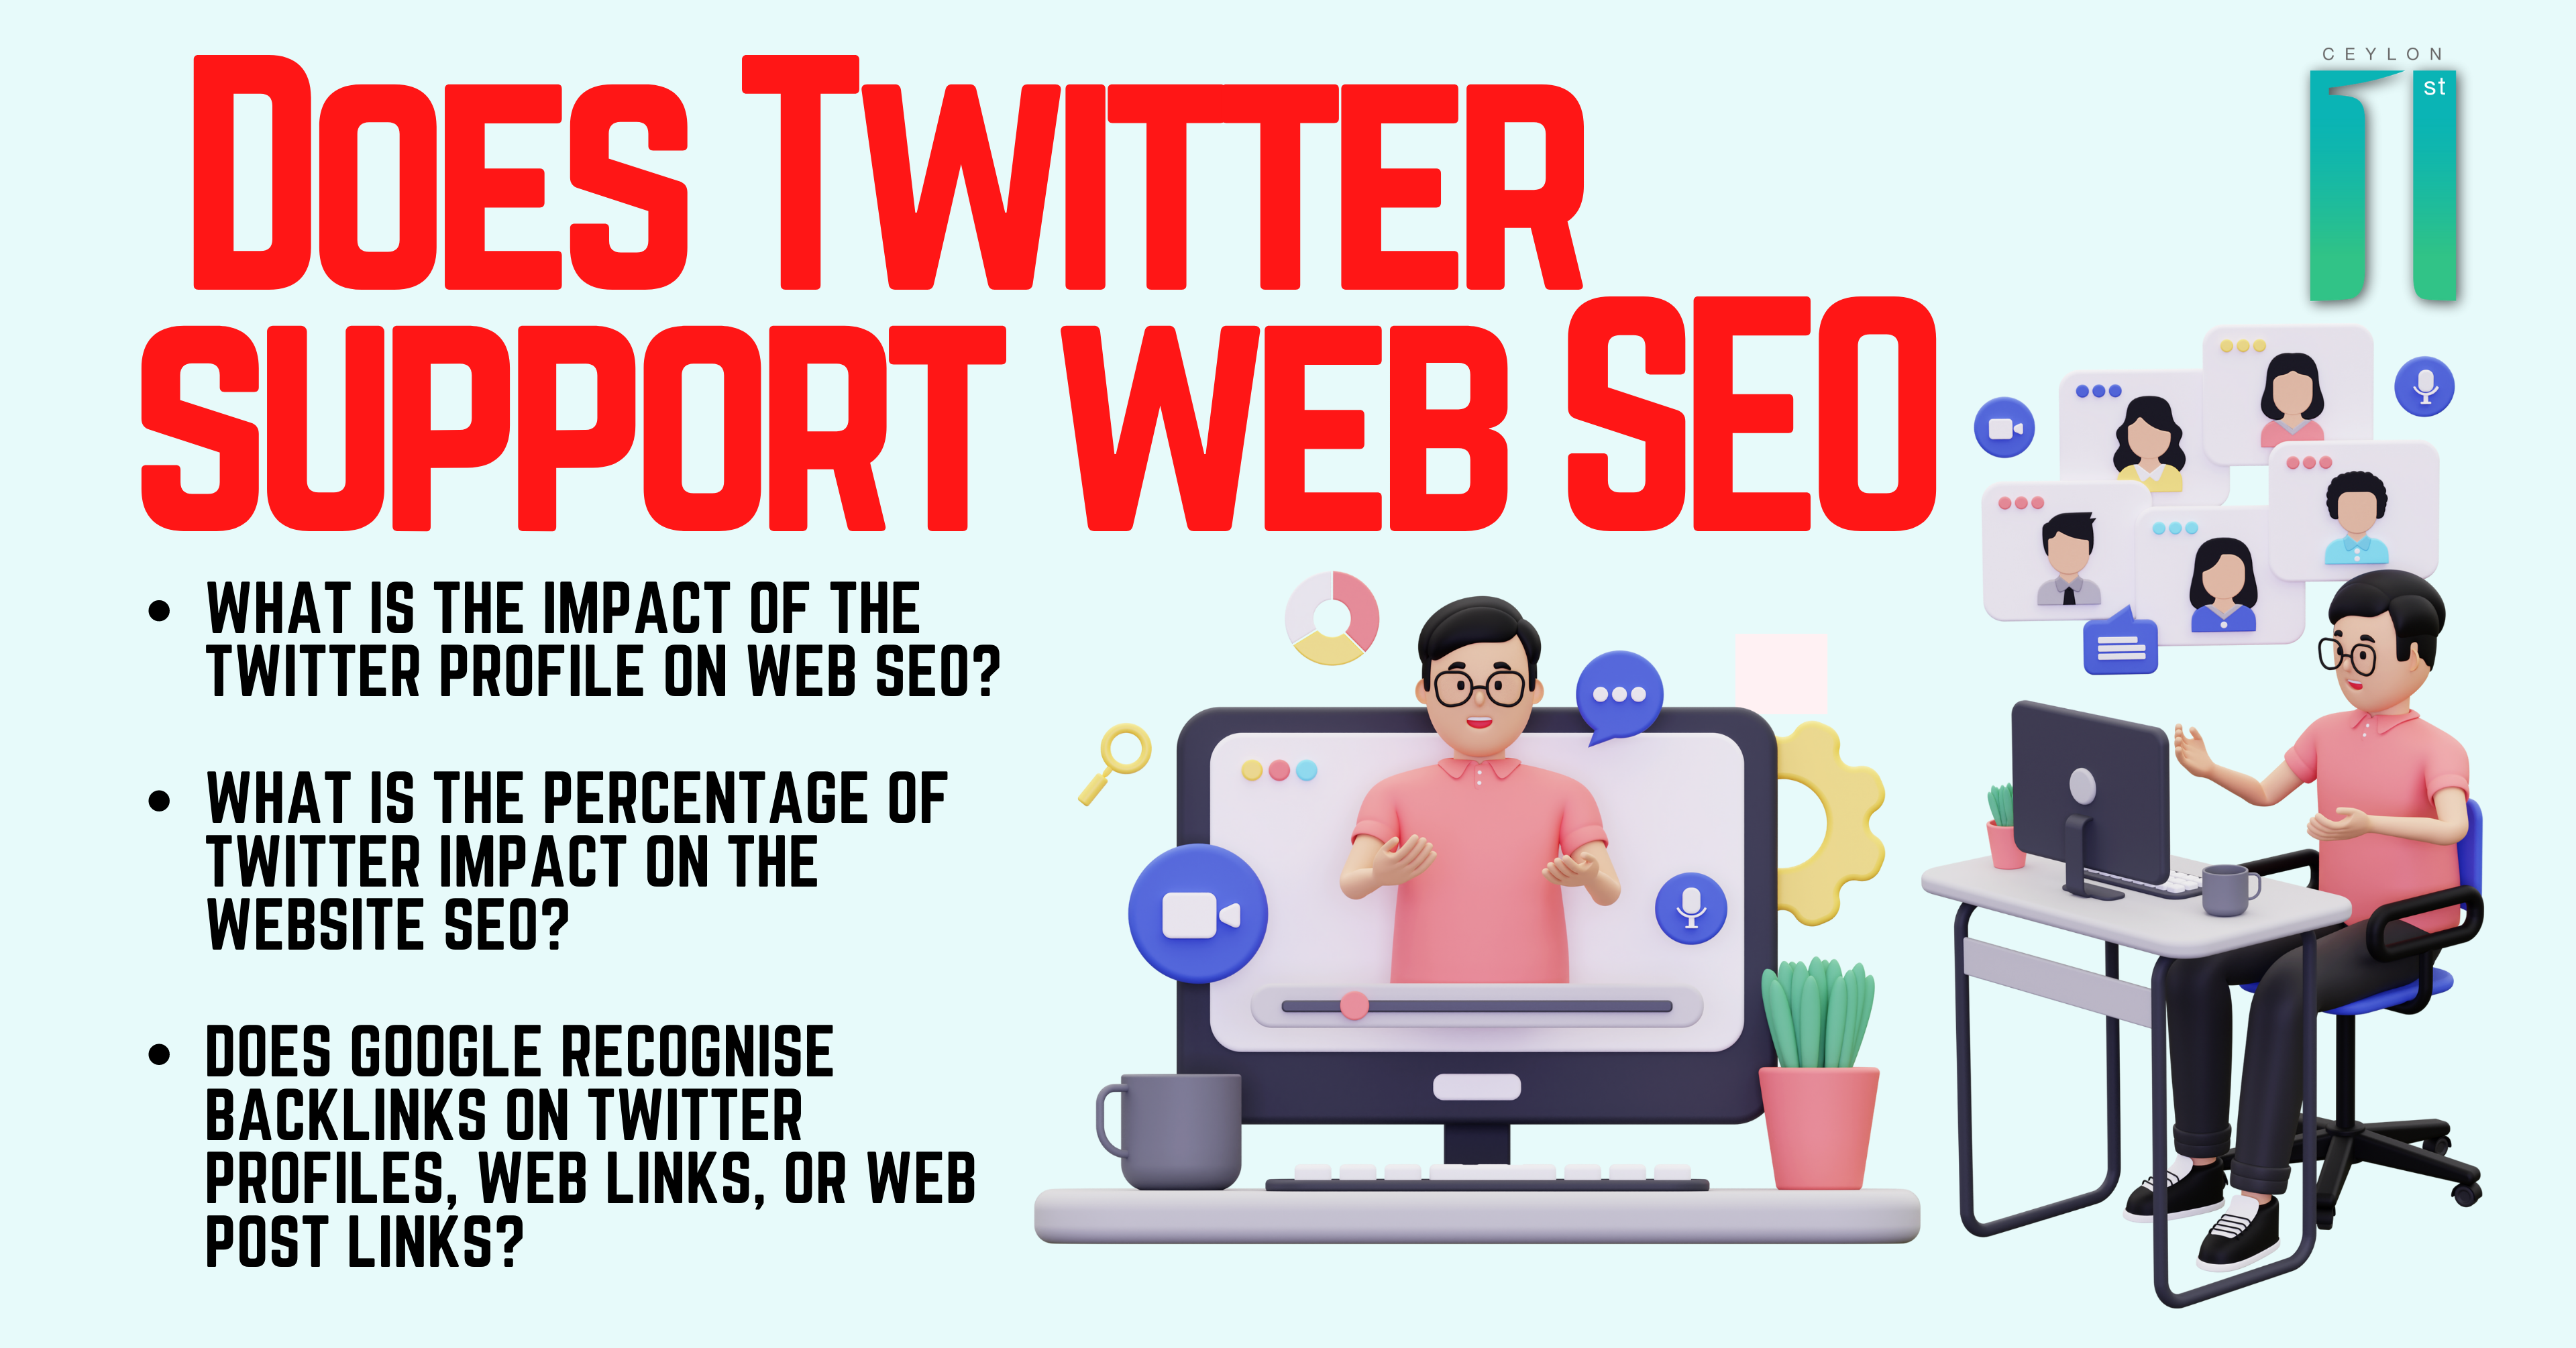 Dose Twitter Support Web SEO